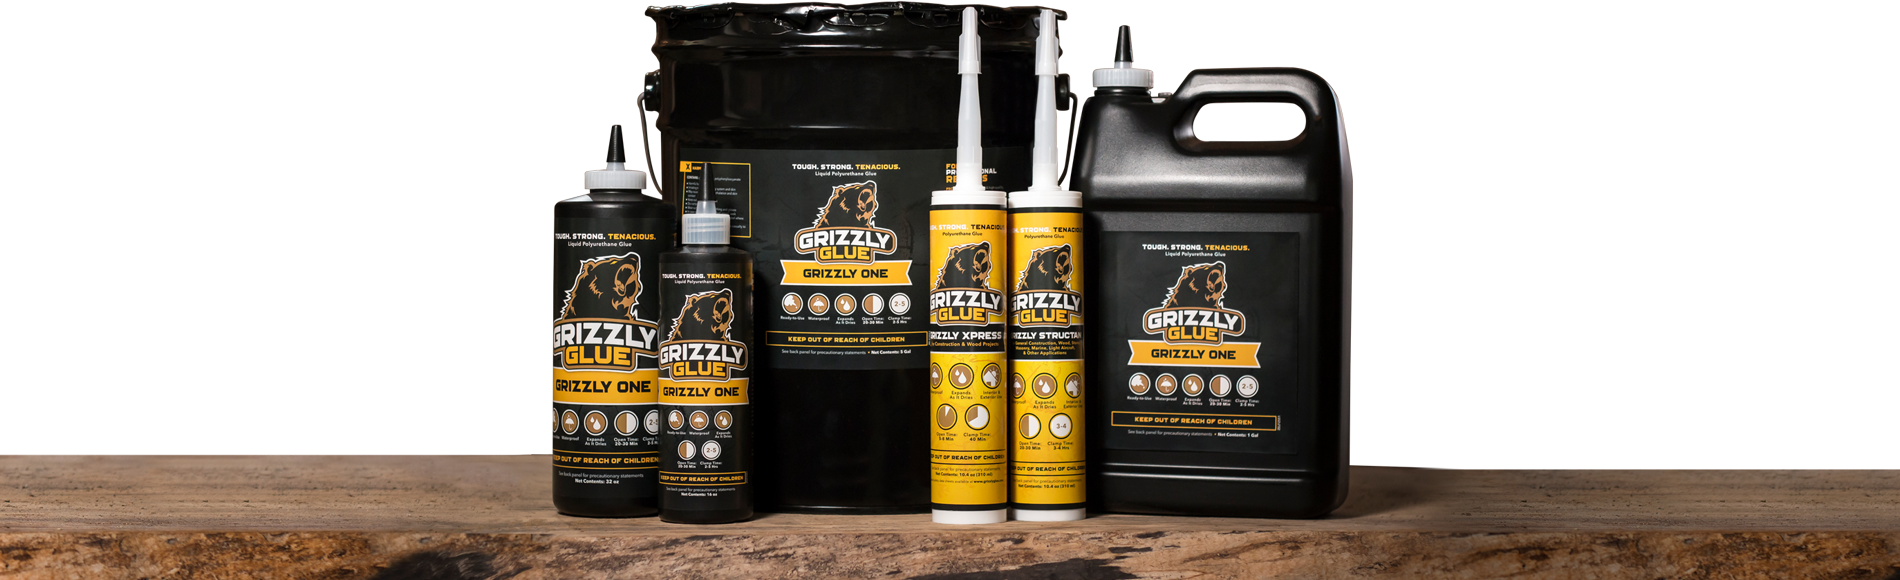 Grizzly Glues